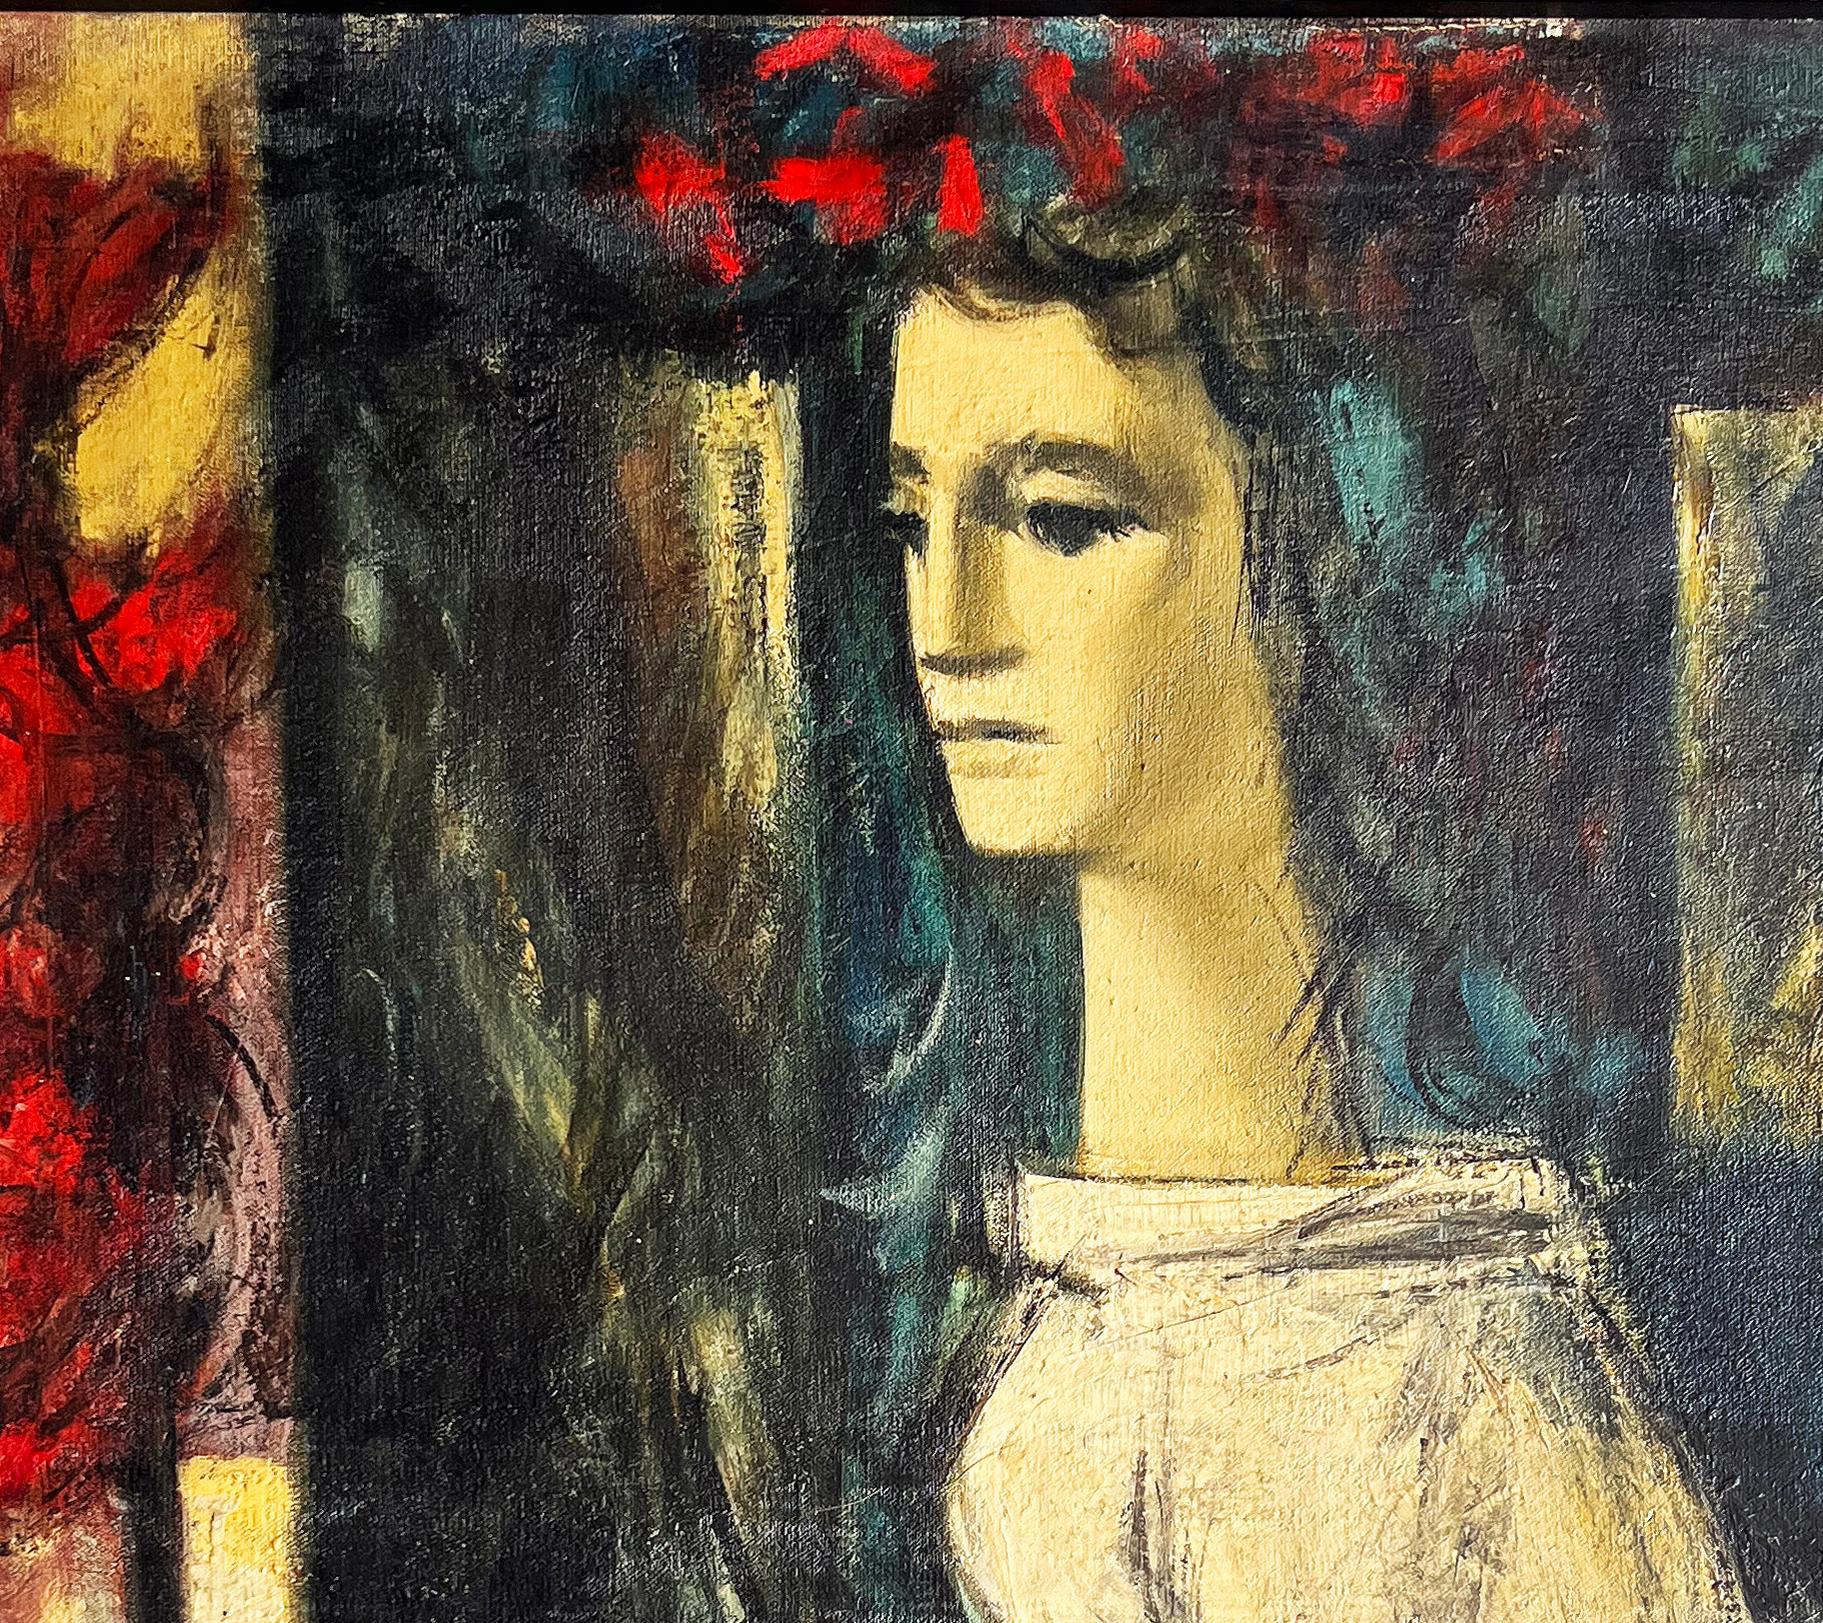 Mid-century French school abstract portrait oil painting

Offered for sale is a vintage French school abstract mid-century oil painting on linen canvas. This exquisite portrait of a woman is illegibly signed in the lower left and includes remnants